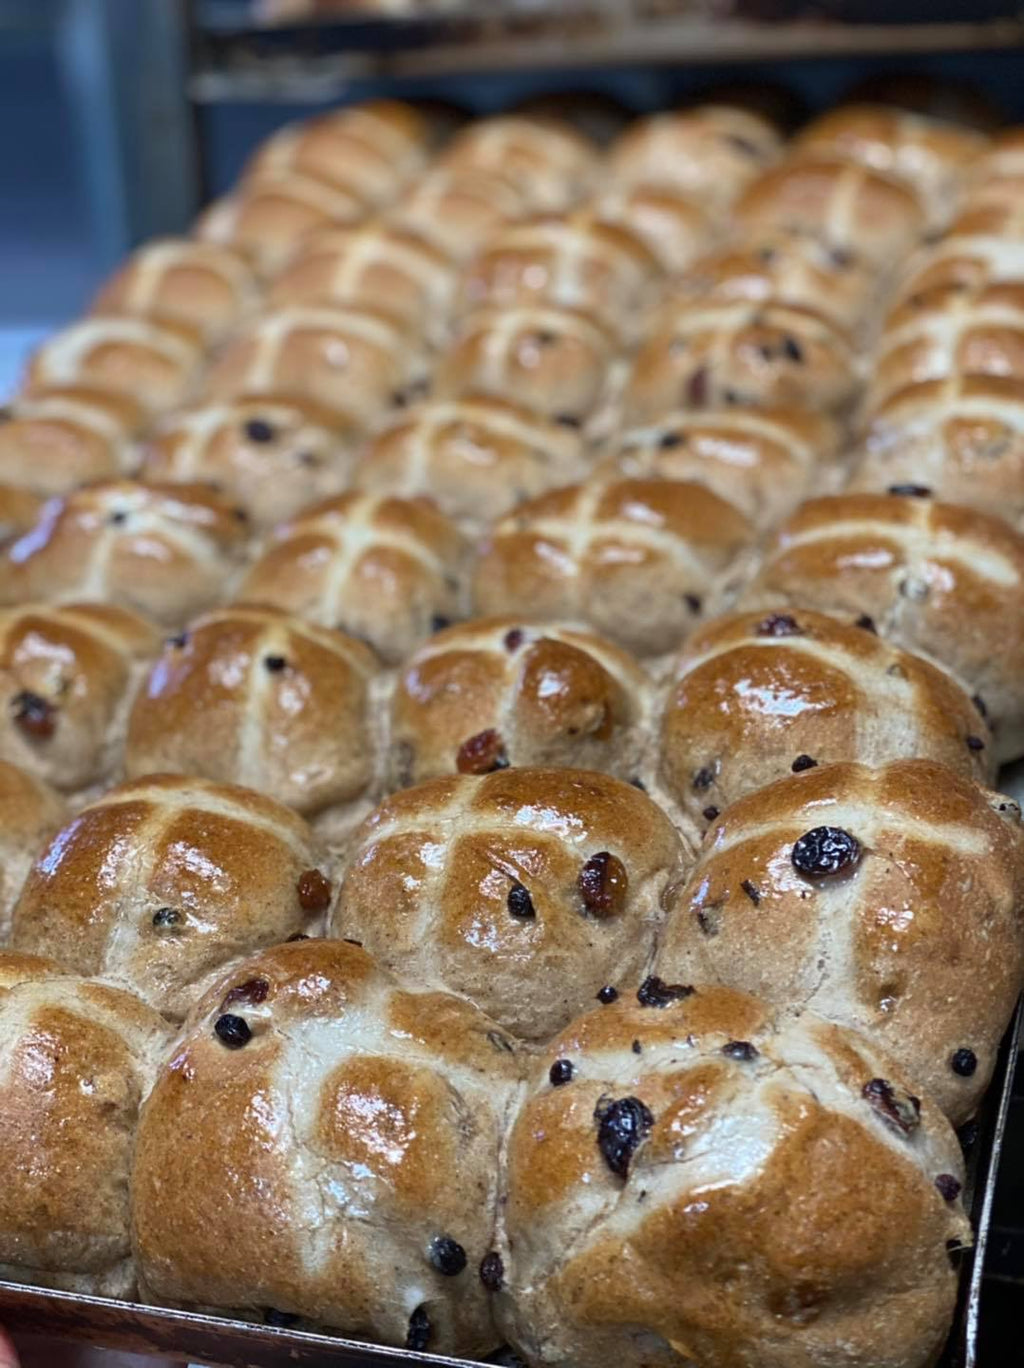 Hot Cross Buns 6 pack (Traditional)